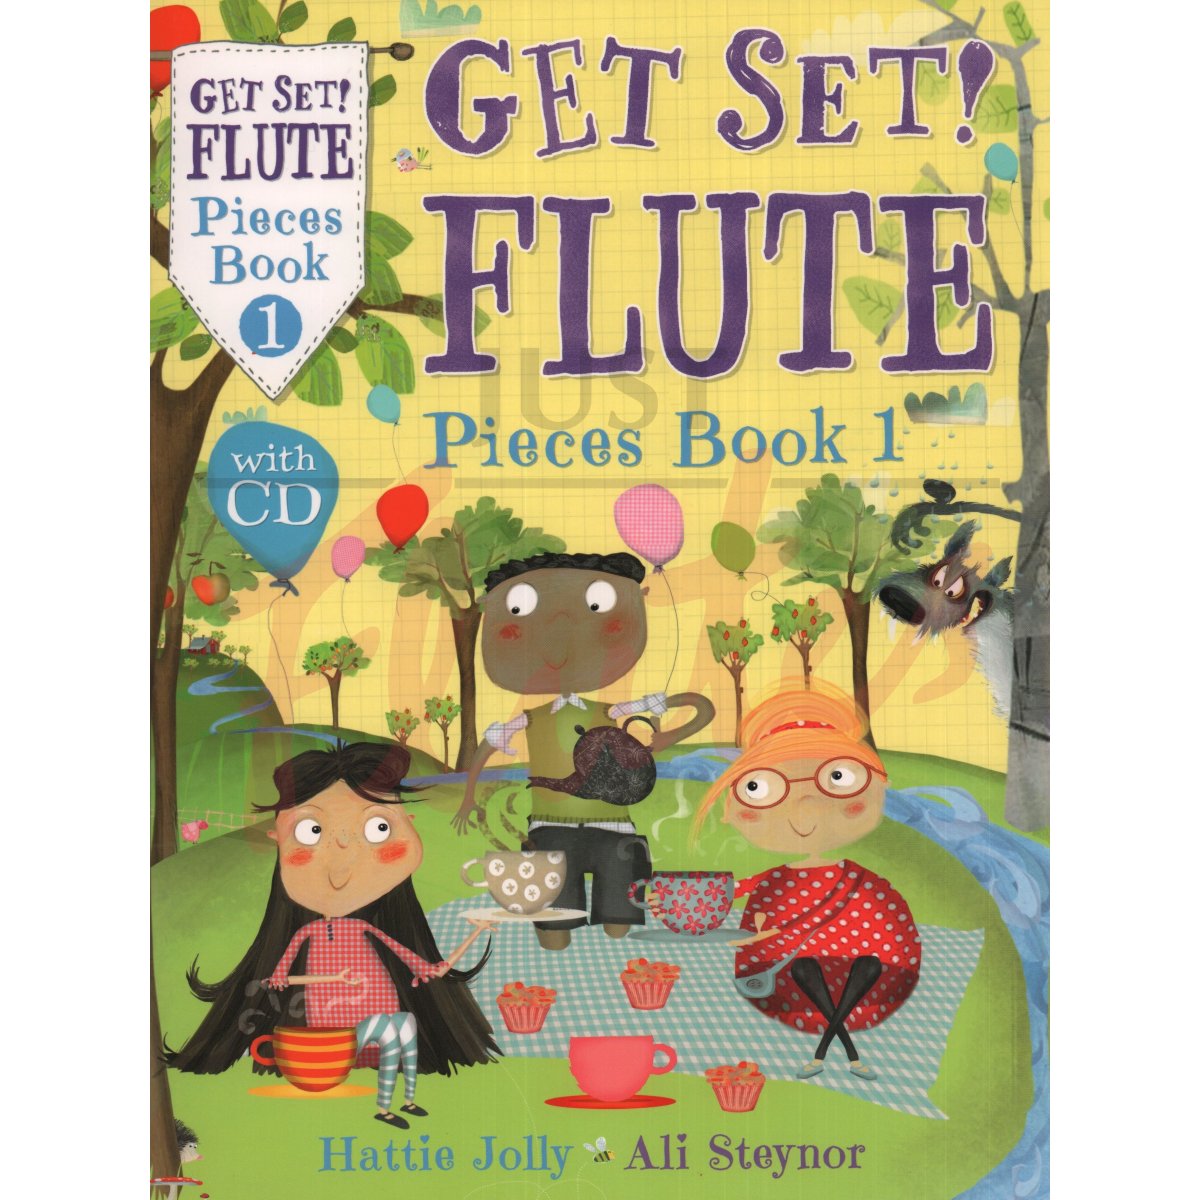 Get Set! Flute Pieces Book 1 for Flute and Piano